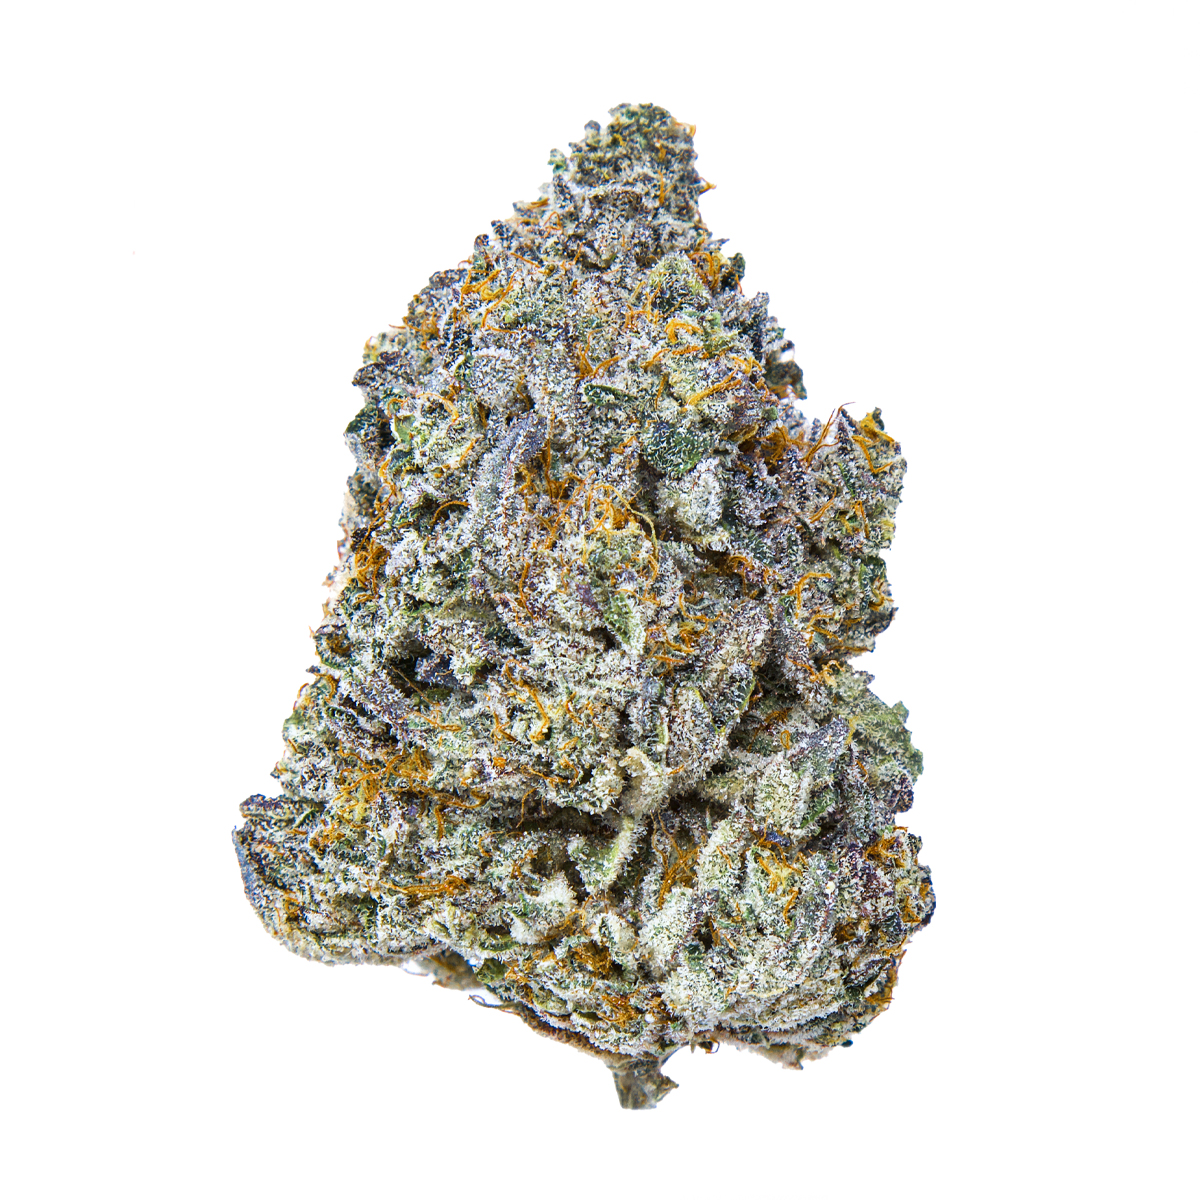 Green Smoke Room - Birthday Cake Feminised Seeds: Birthday Cake Kush, also  known as Wedding Cake or simply Birthday Cake, is an indica-dominant hybrid  with strong body effects and sweet cake-like flavour.